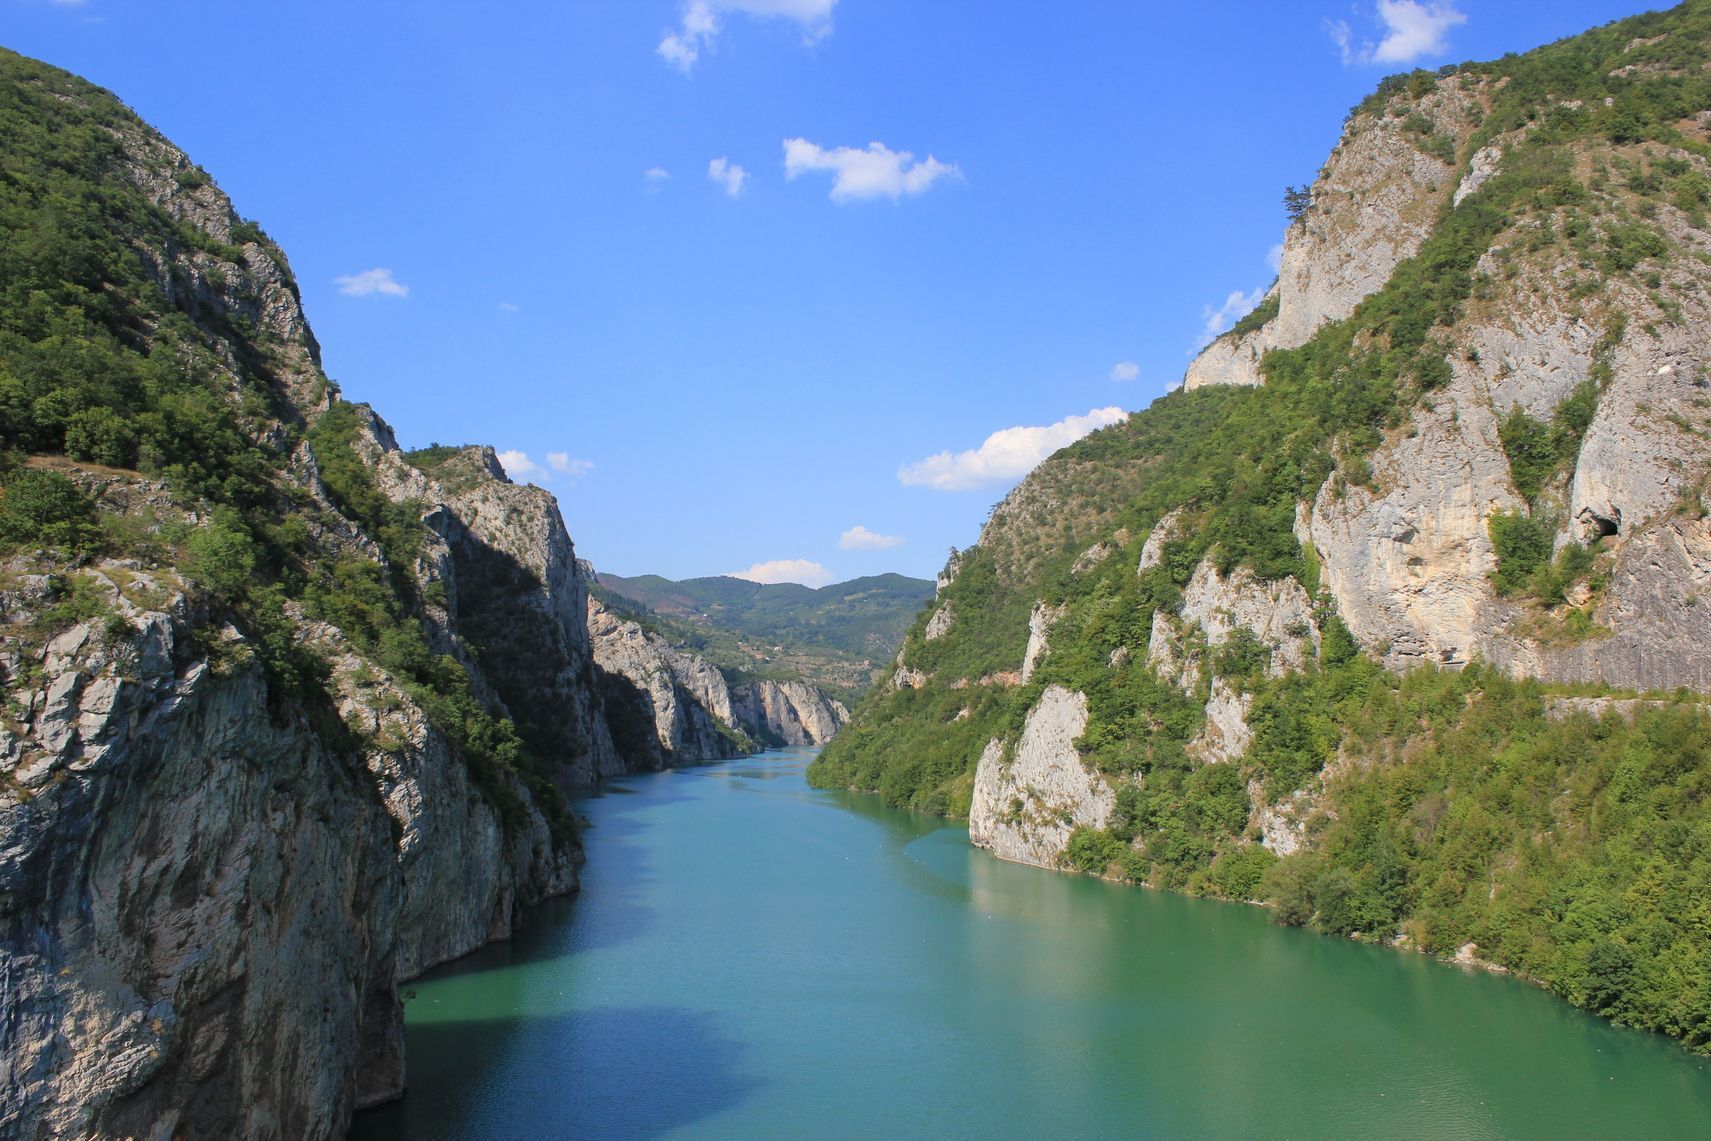 The Drina, made famous by poets and artists, is one of the biggest rivers in the Balkans. It meanders intricately along deep gorges and is the natural border between Bosnia and Herzegovina and Serbia